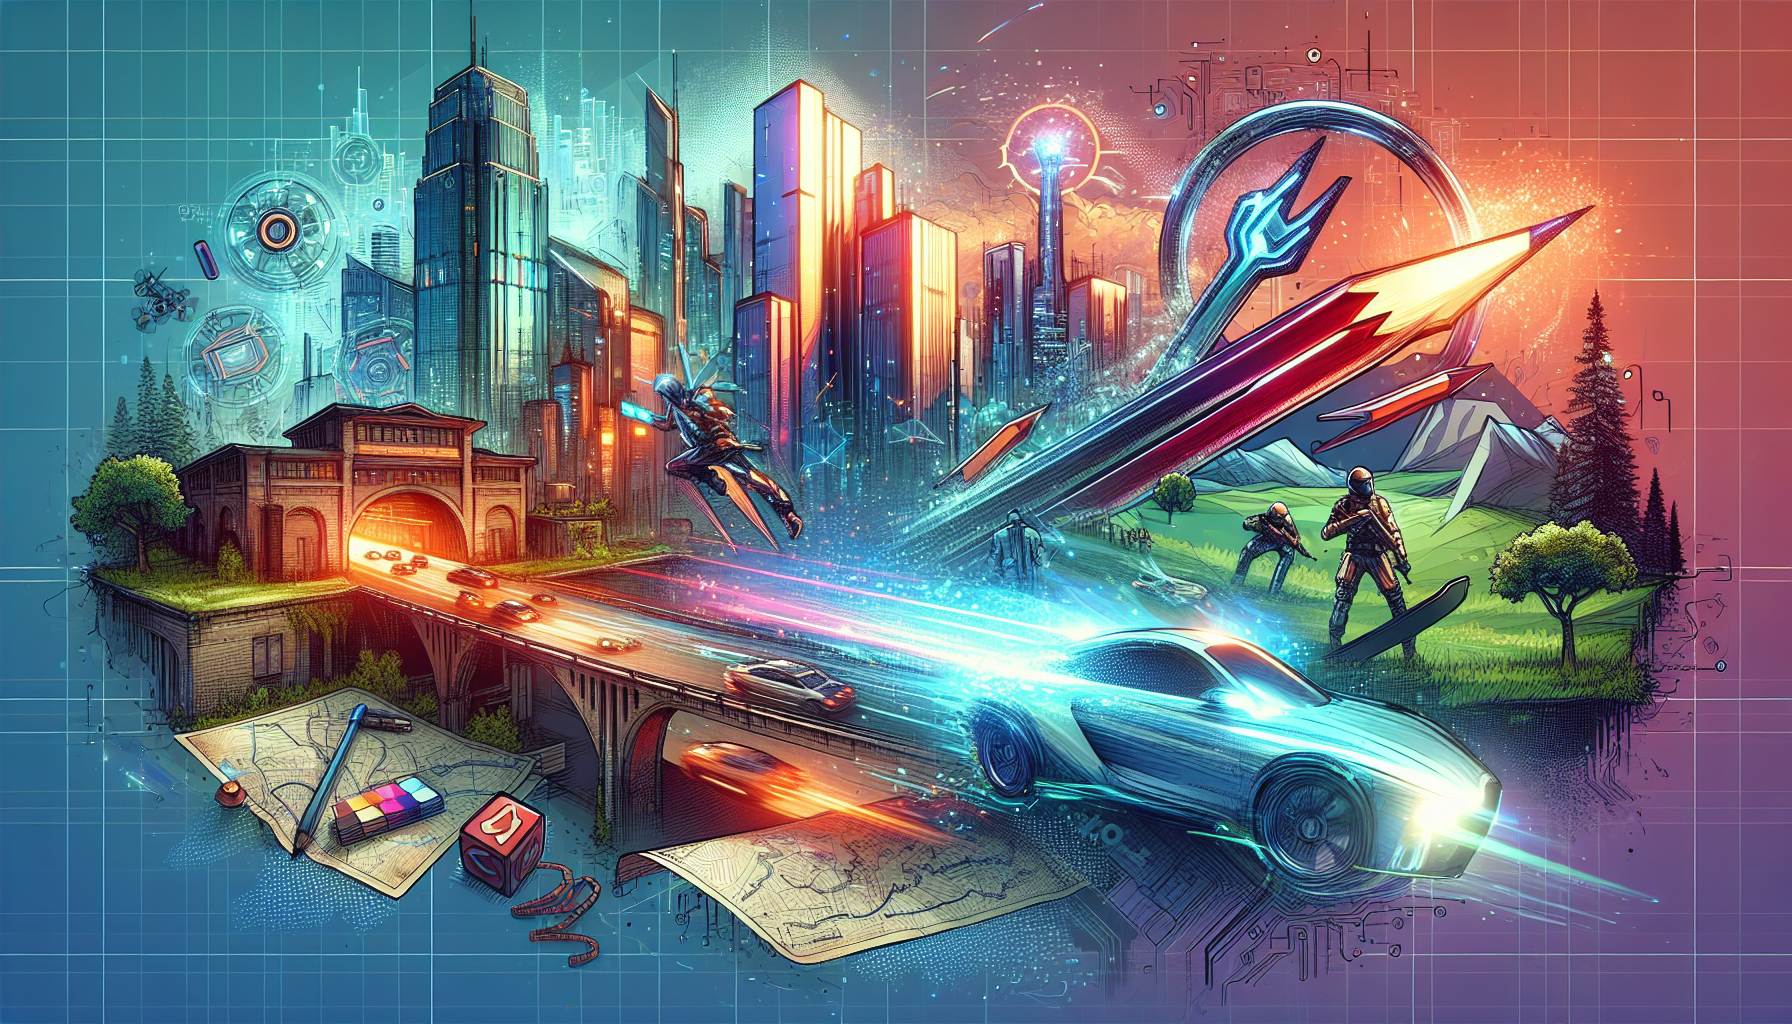 A photorealistic image capturing the essence of world-building for action stories. The scene should be colorful, emitting modern vibes. It might encompass elements like a crafted cityscape with gleaming skyscrapers, a high-tech futuristic gadget, hand-drawn maps, and engaging action illustrations such as a chase scene or a dynamic battle scenario. Each element should shine, harboring the potential to be an individual setting for an action story.